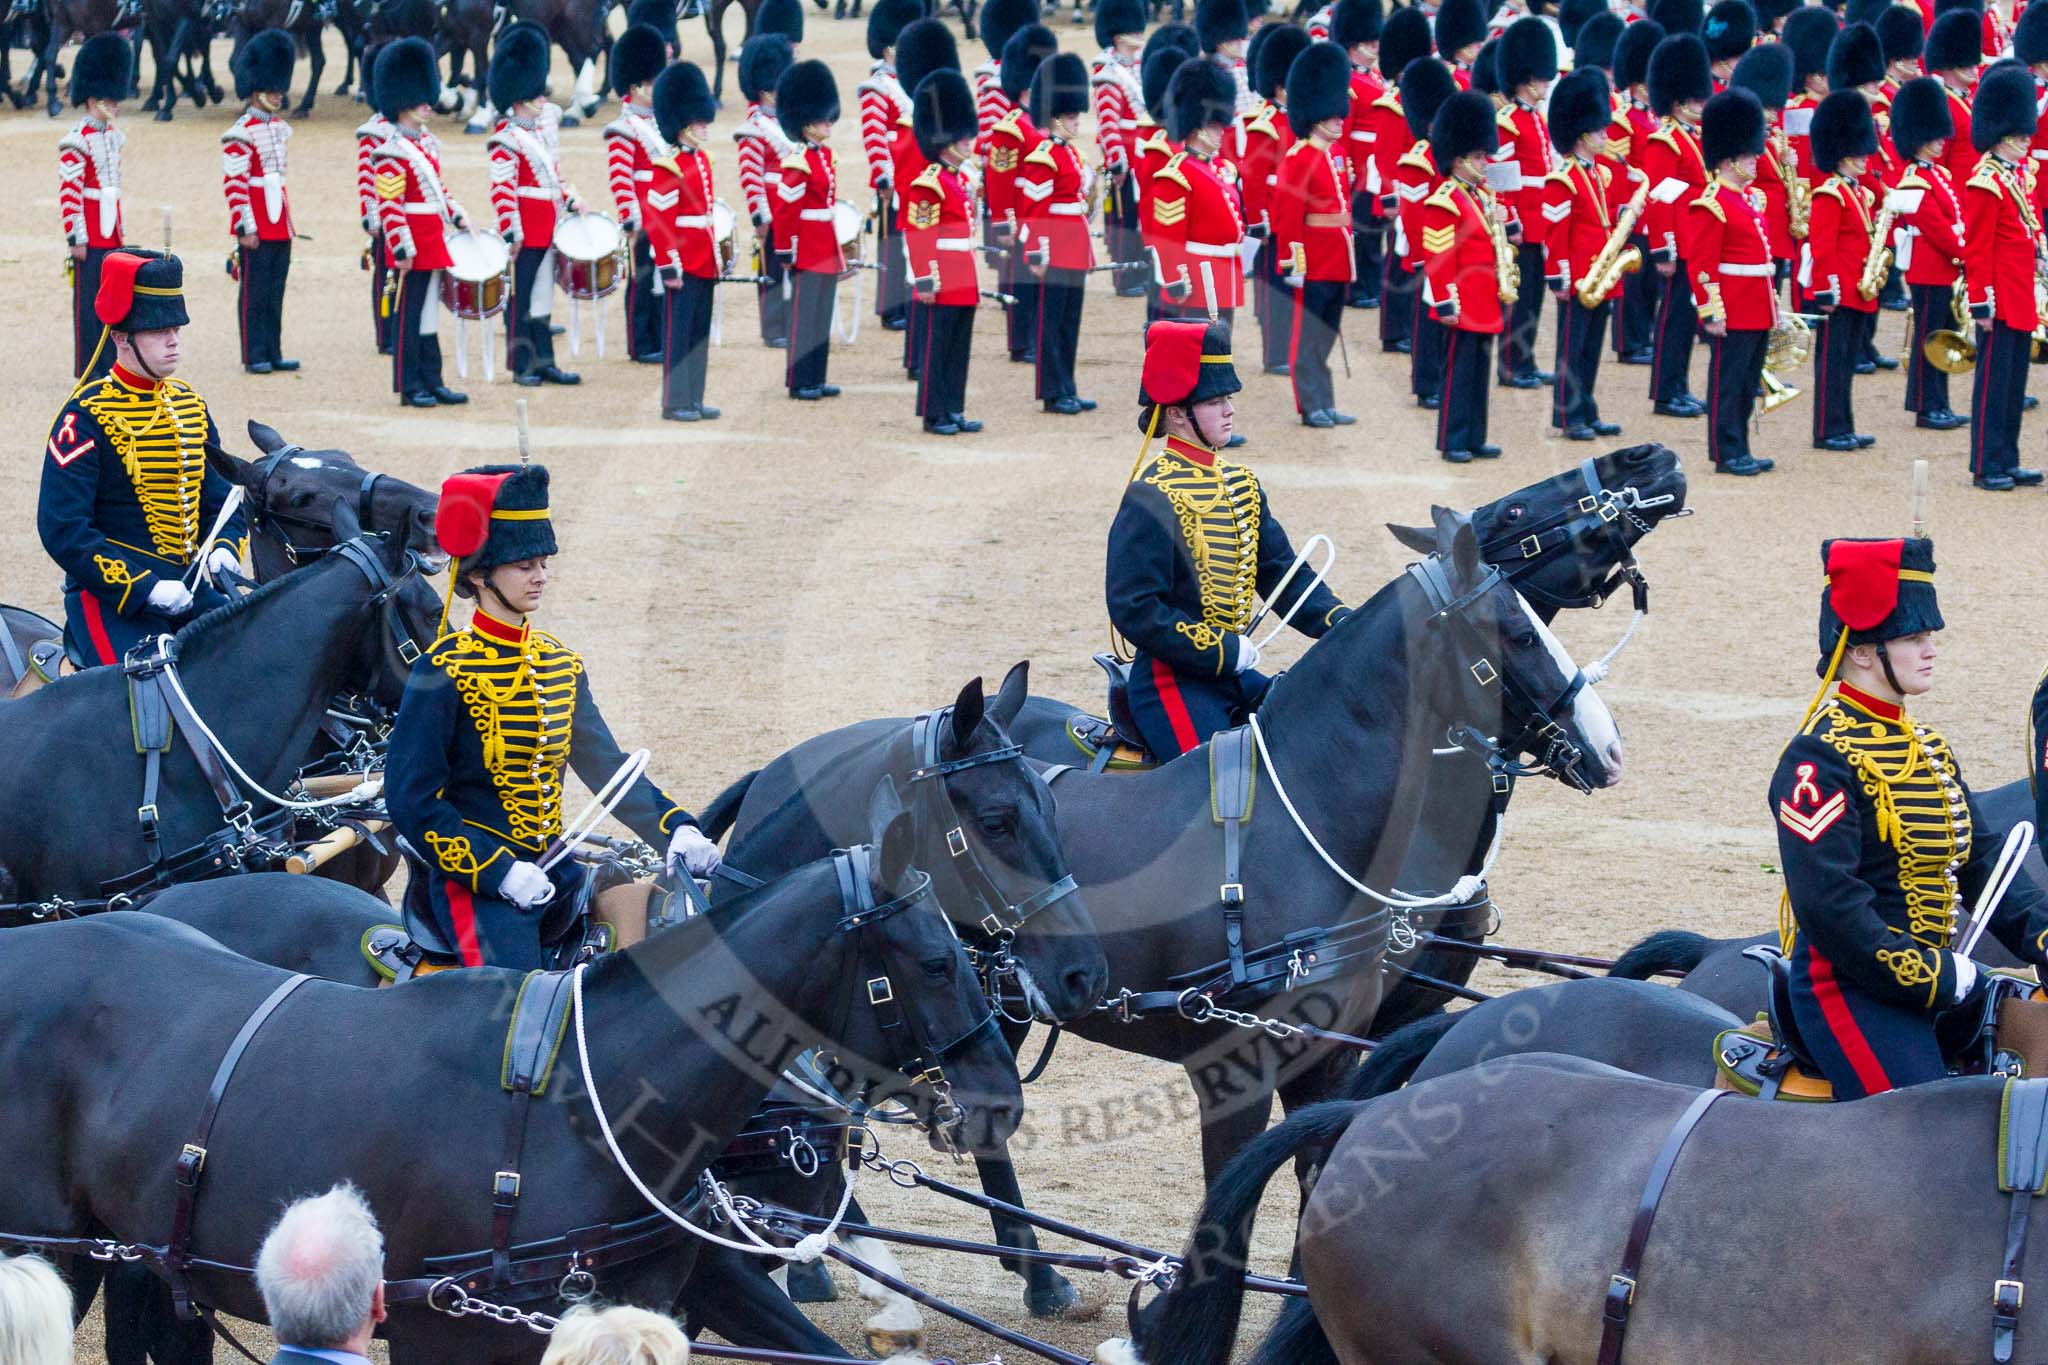 Trooping the Colour 2015. Image #545, 13 June 2015 11:53 Horse Guards Parade, London, UK